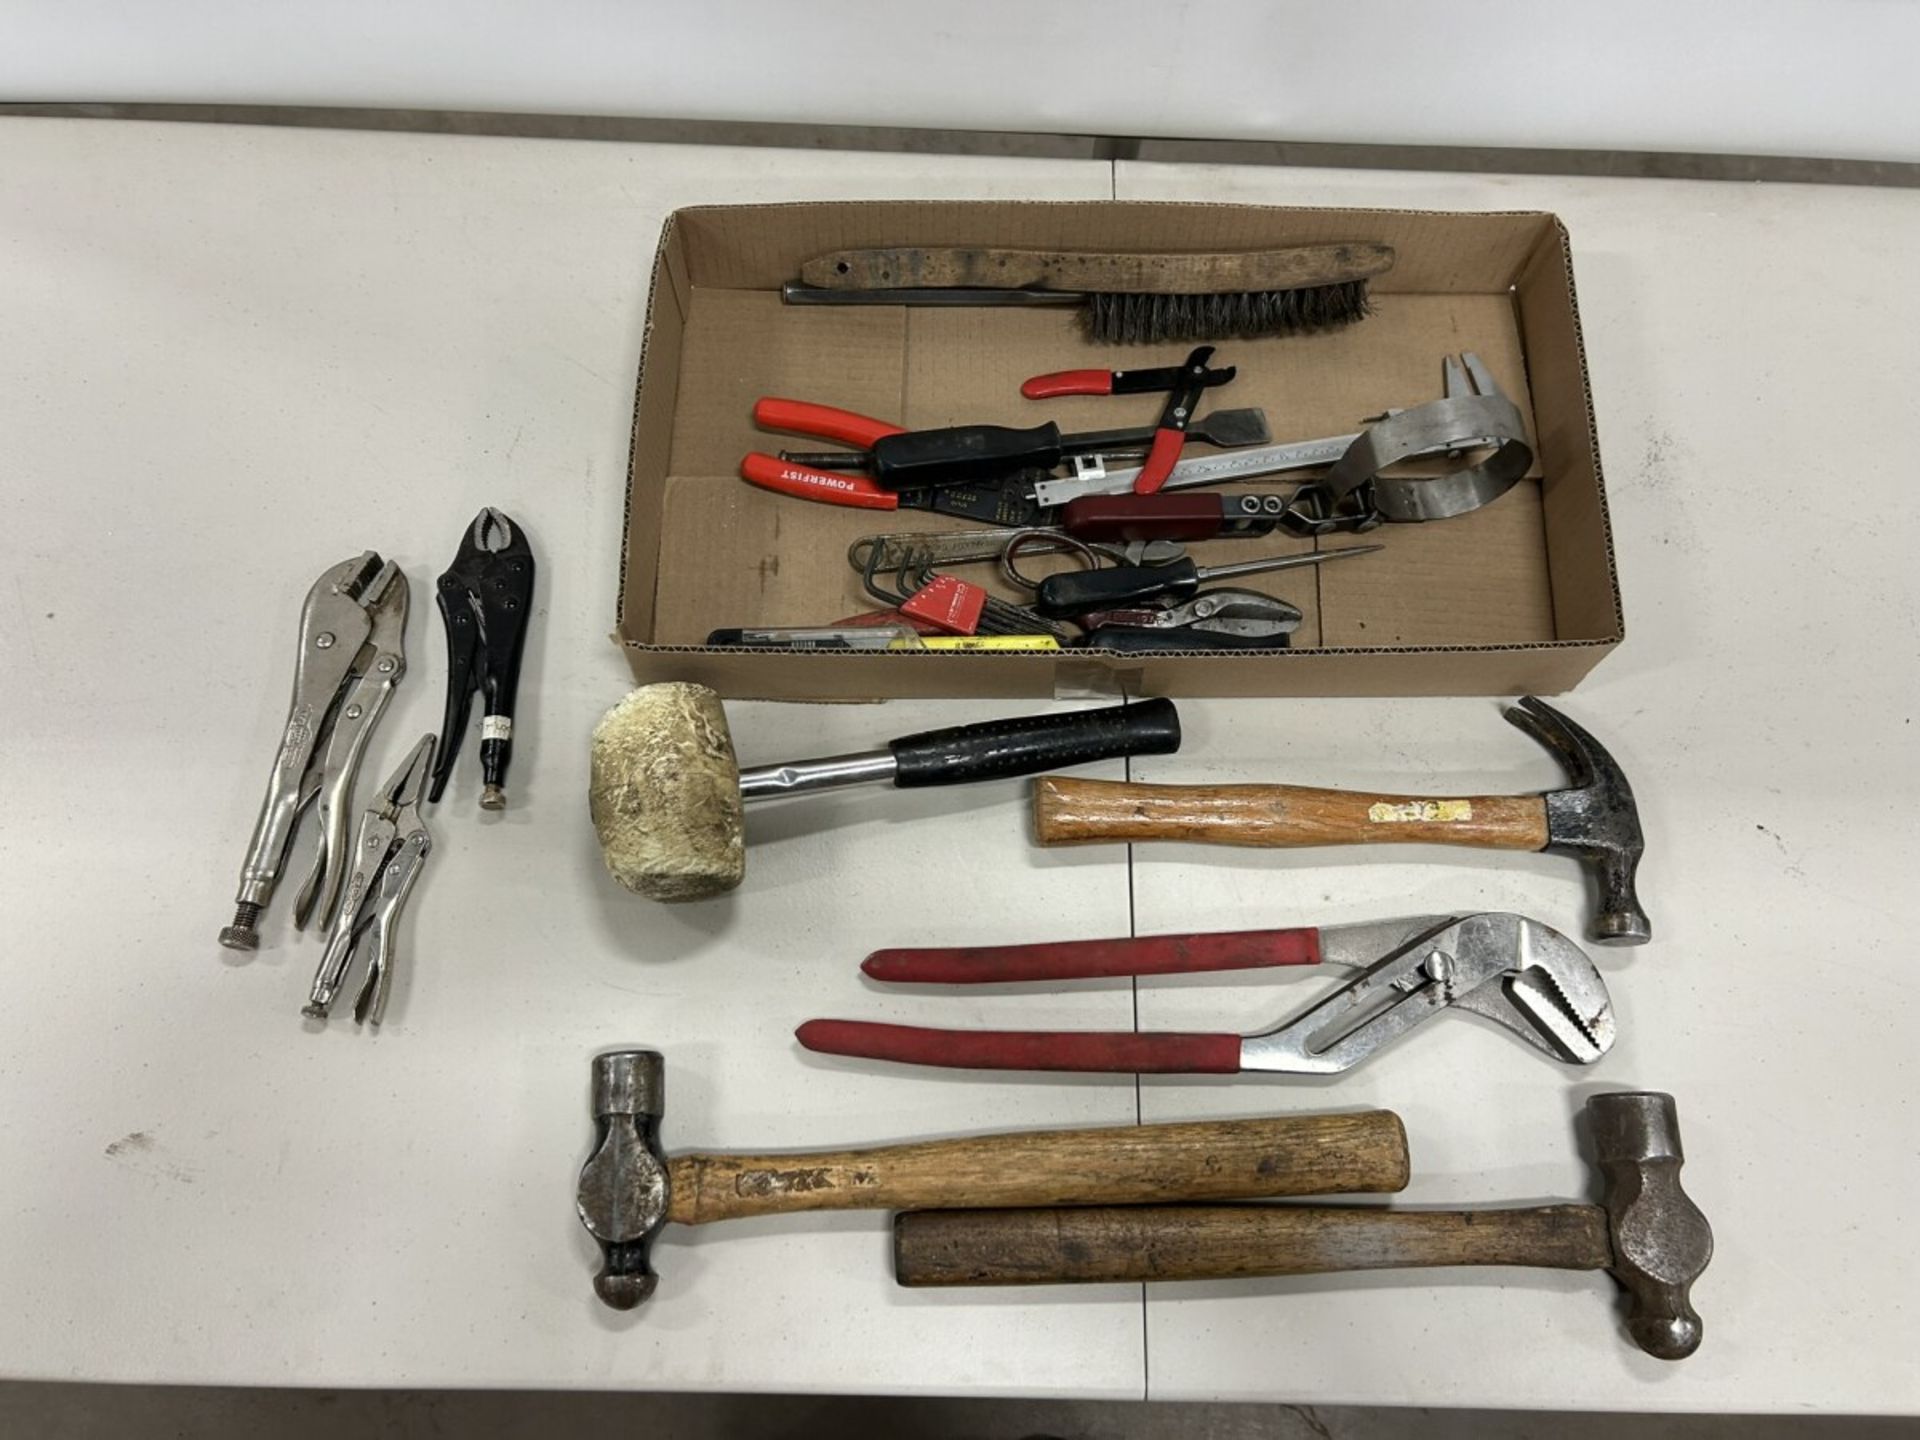 L/O ASSORTED HAND TOOLS -RUBBER MALLET, HAMMERS ,VICE GRIPS, PRY BARS, ETC.